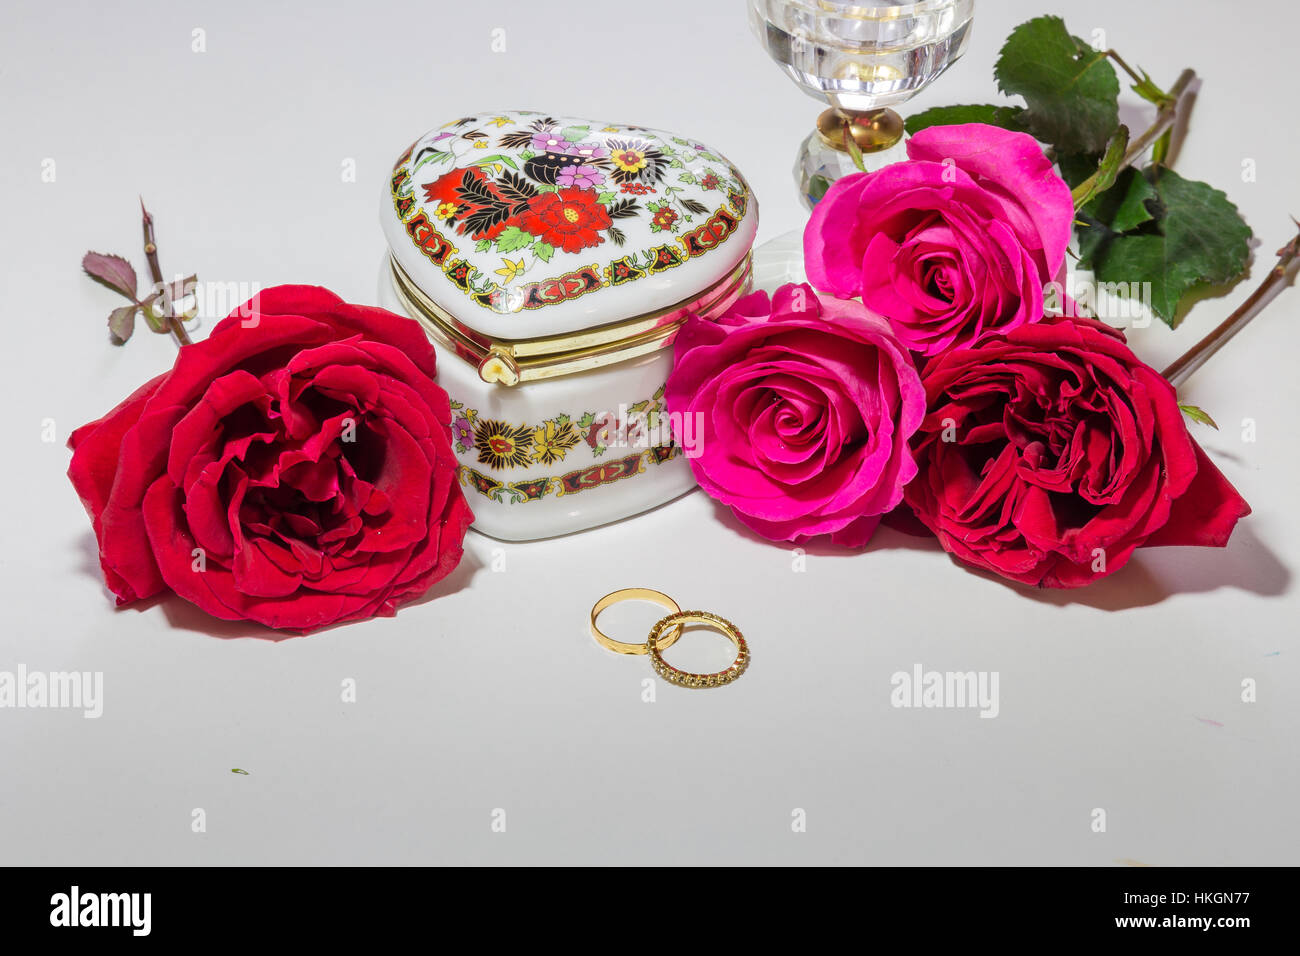 Romantic heart shaped embroidered jewelry box with bright red and pink roses with gold engagement rings for Valentines day. Stock Photo